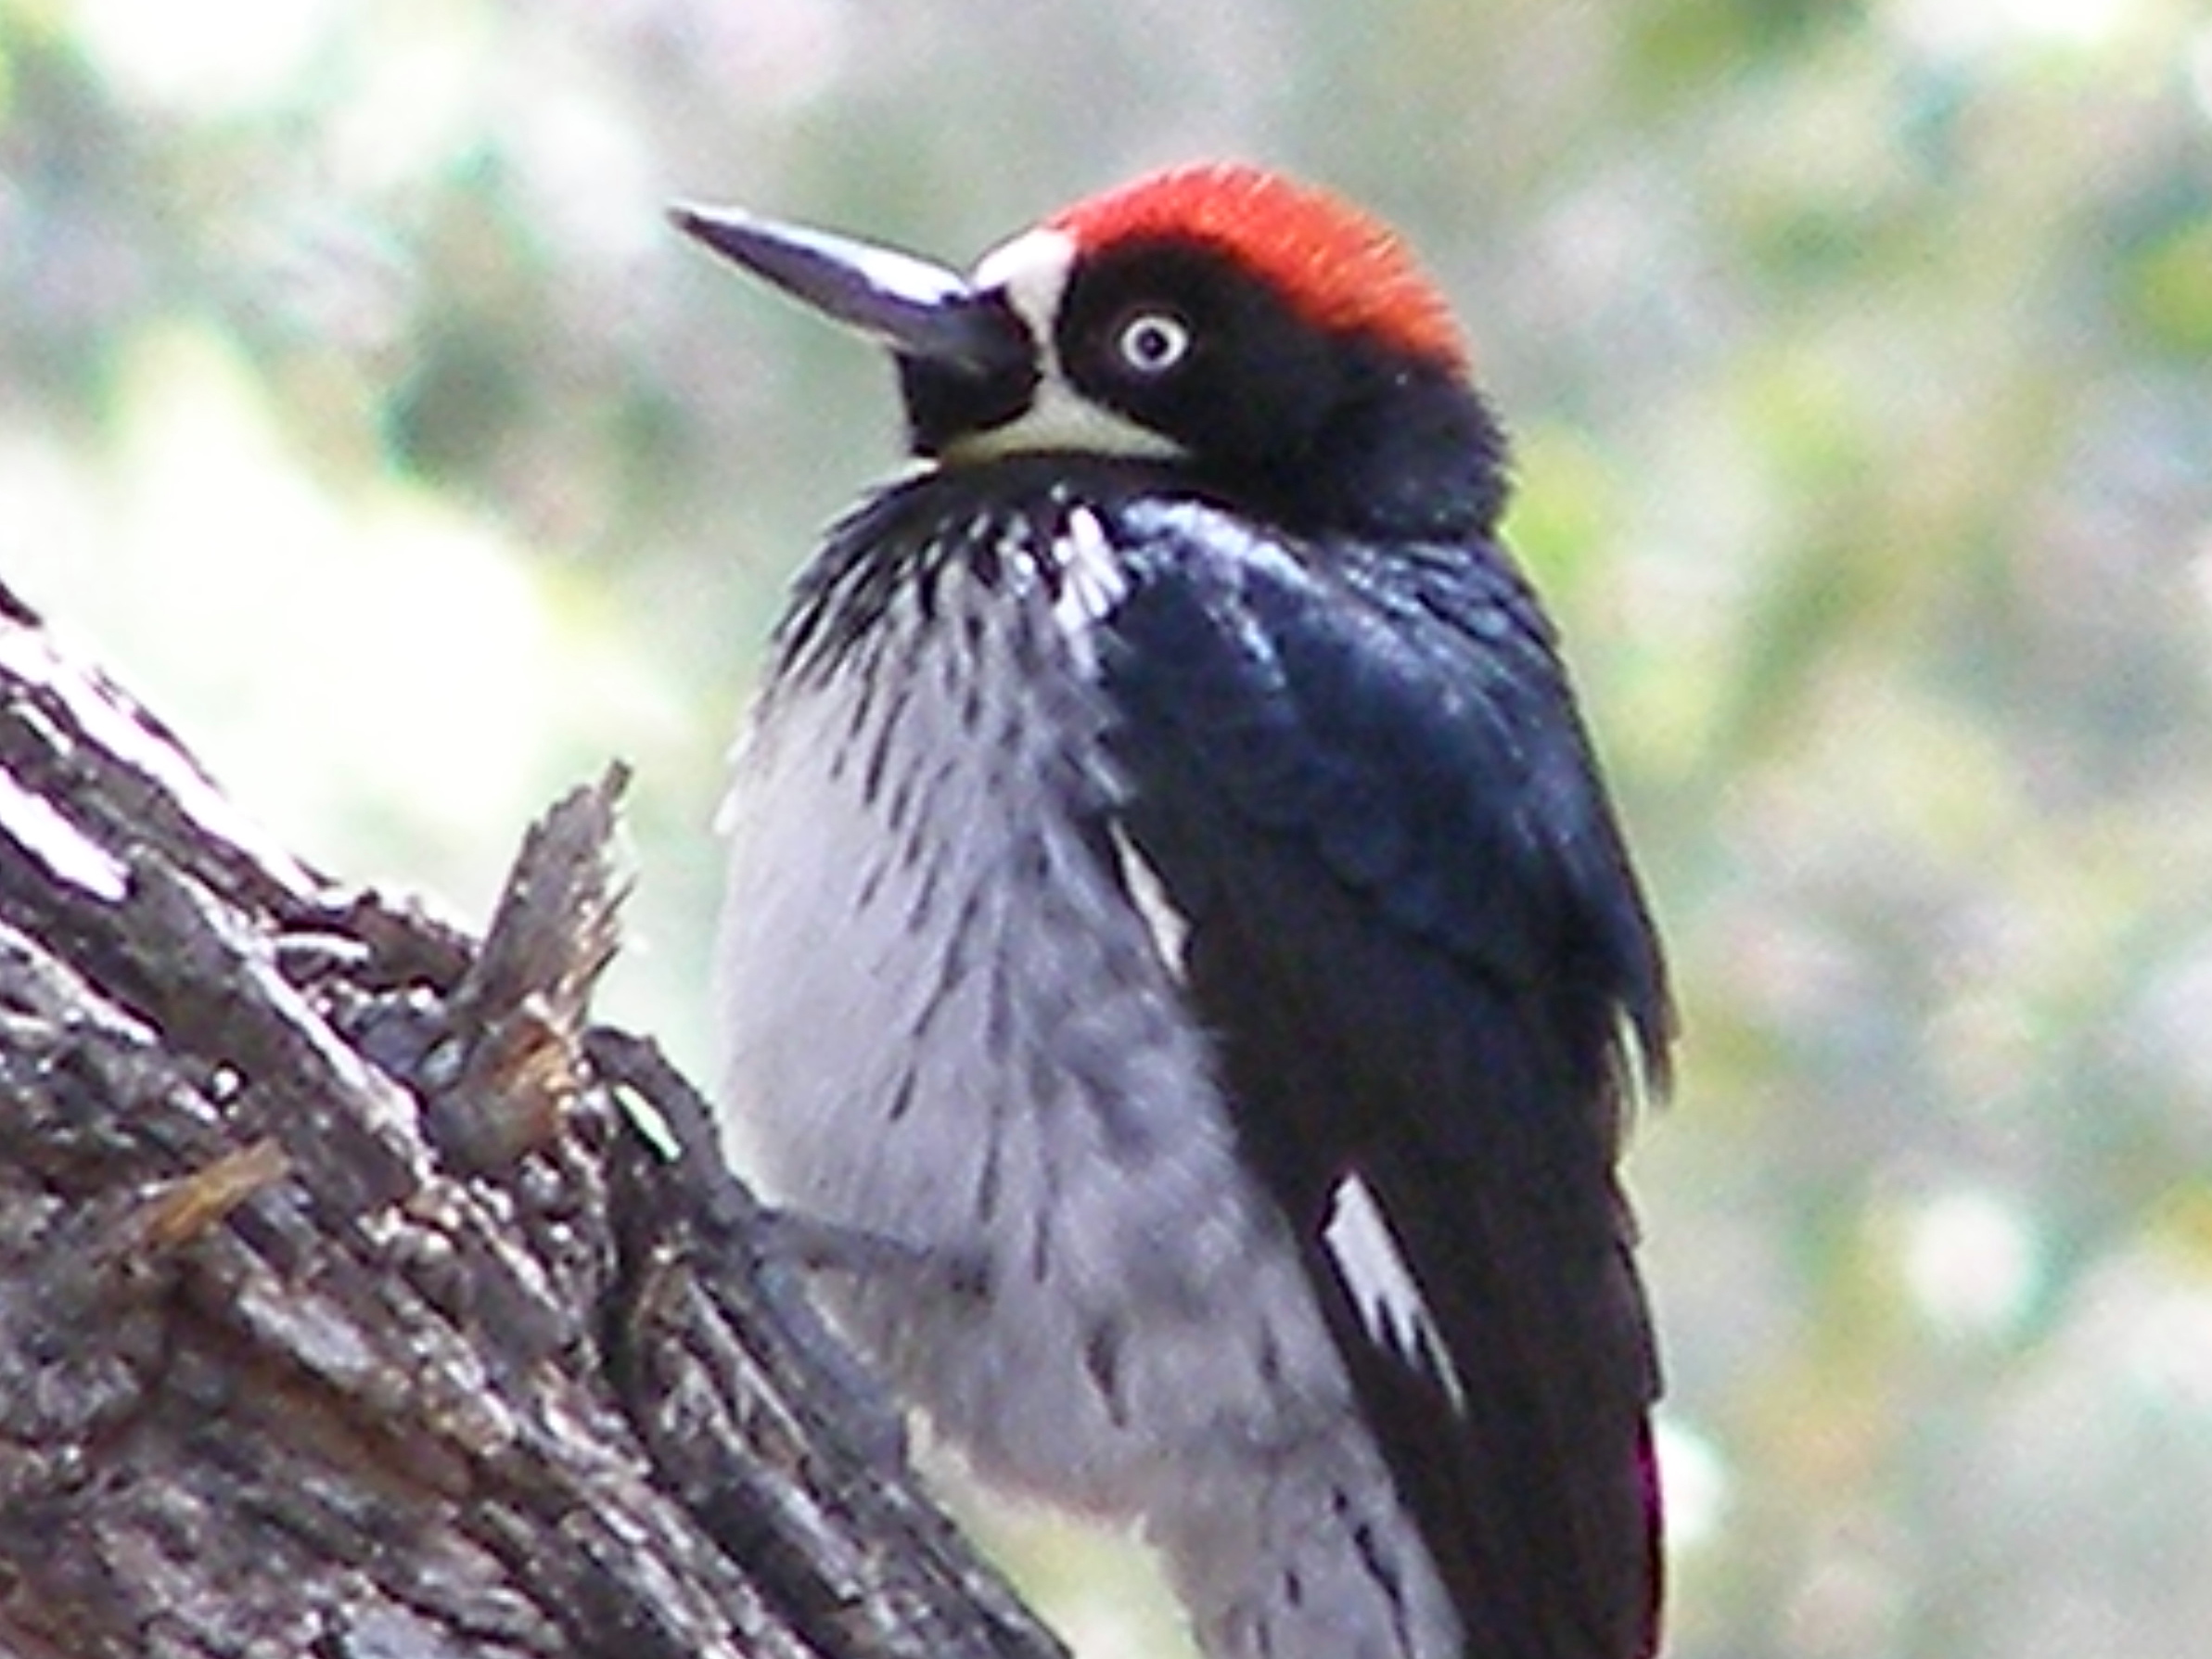 Click picture to see more Acorn Woodpeckers.